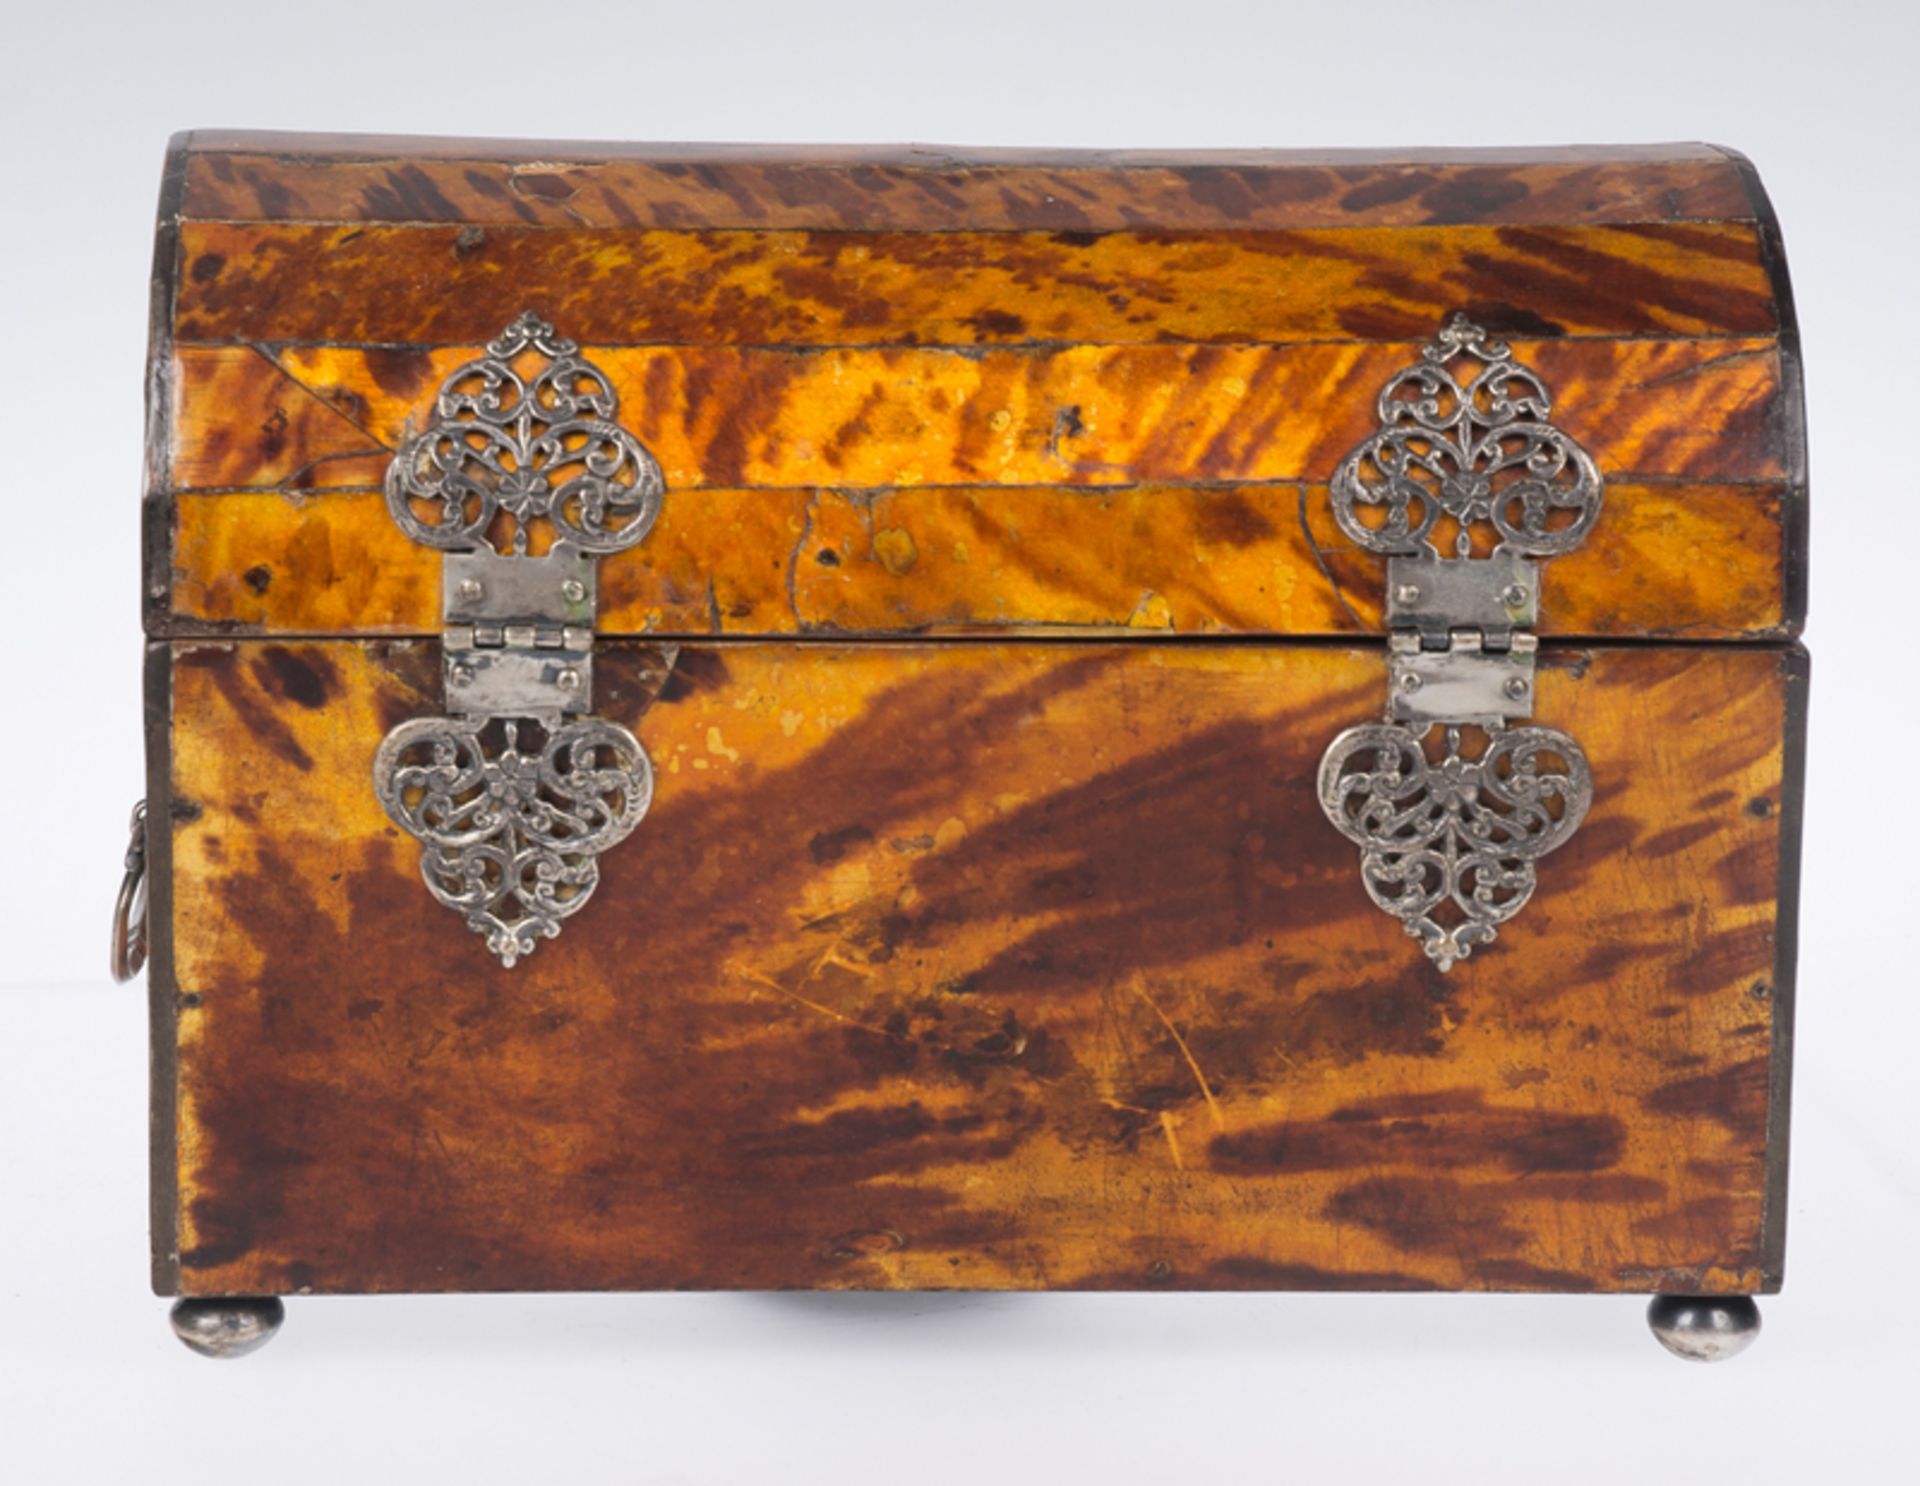 Wooden box covered in tortoiseshell. Colonial work. Mexico. 18th century Wooden box covered in - Image 6 of 6